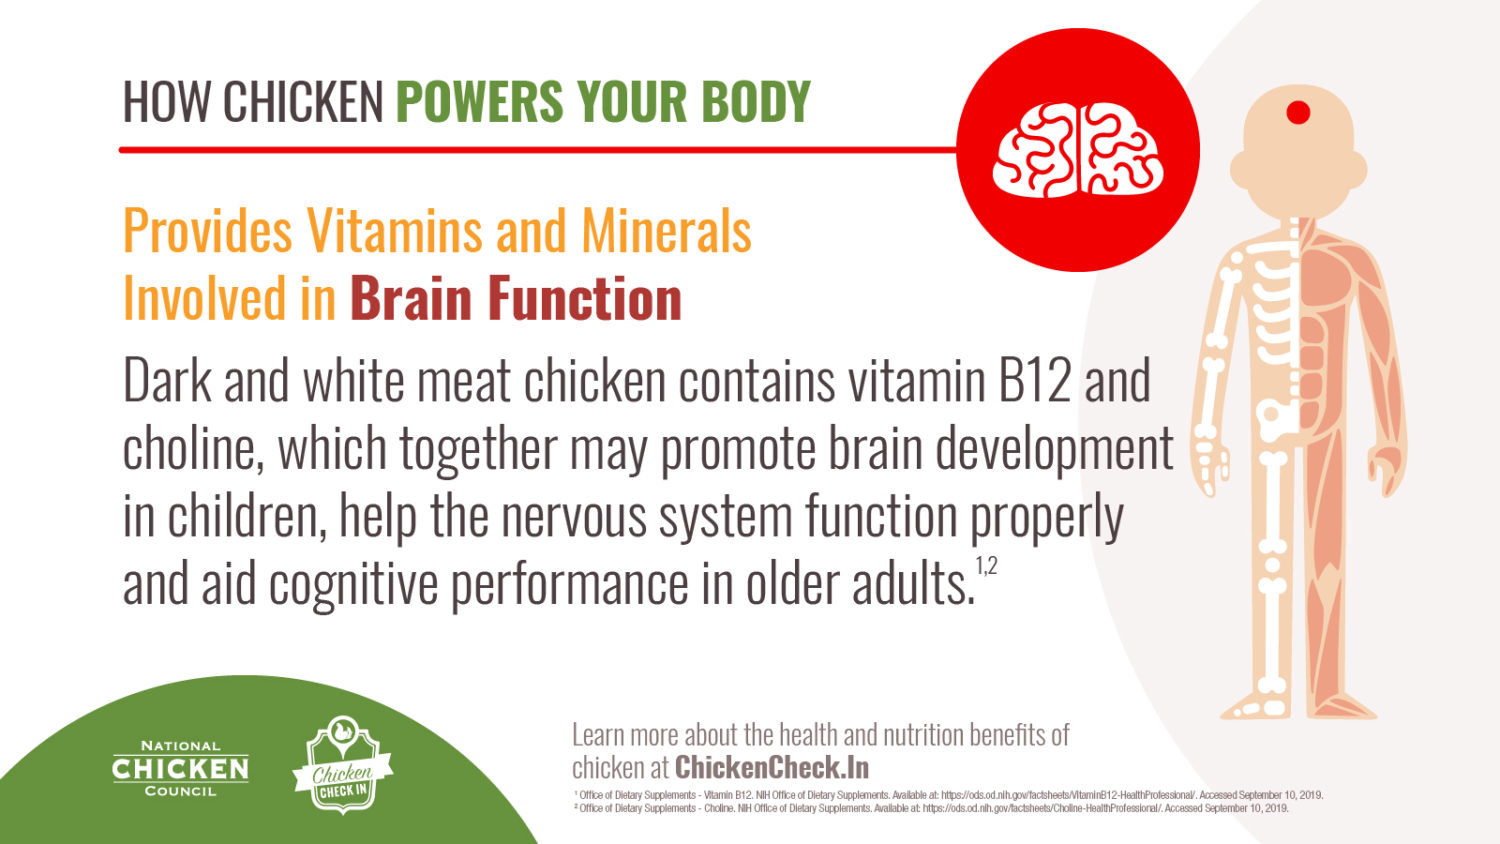 Chicken Provides Vitamins and Minerals Involved in Brain Function